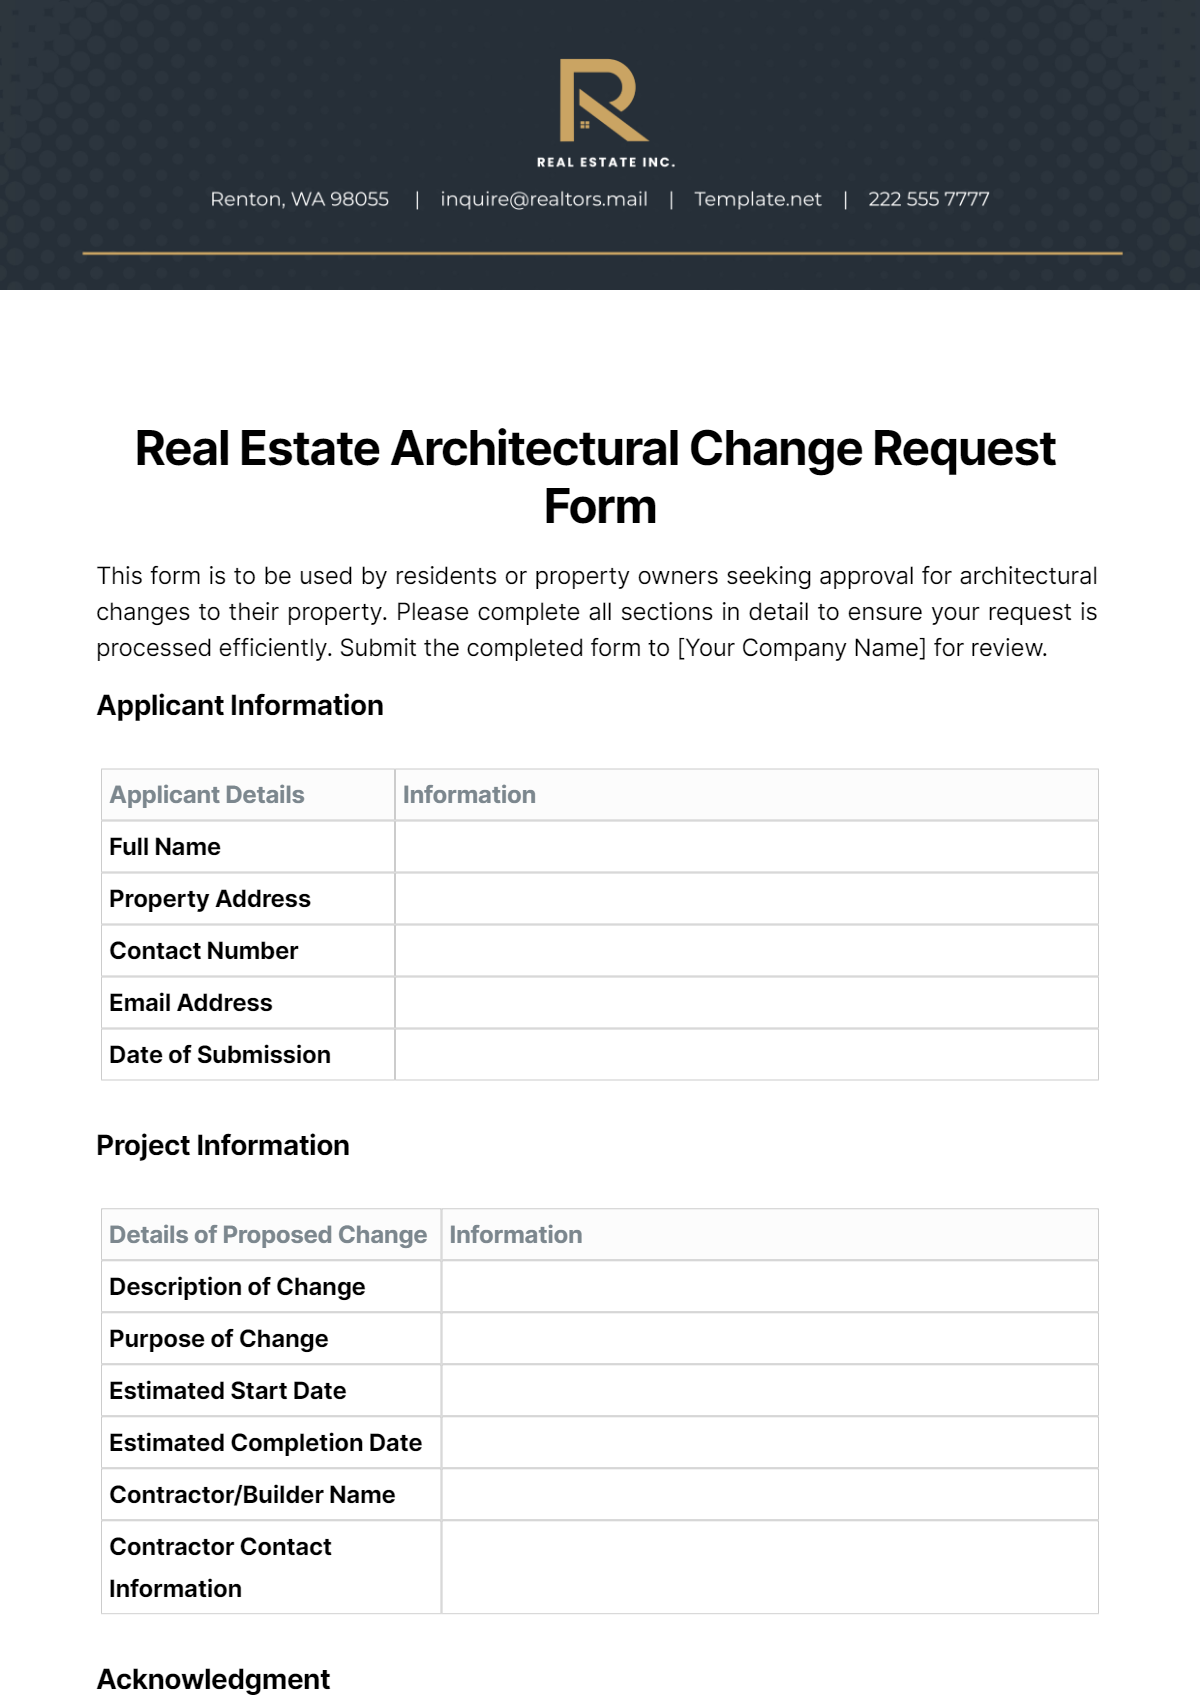 Real Estate Architectural Change Request Form Template